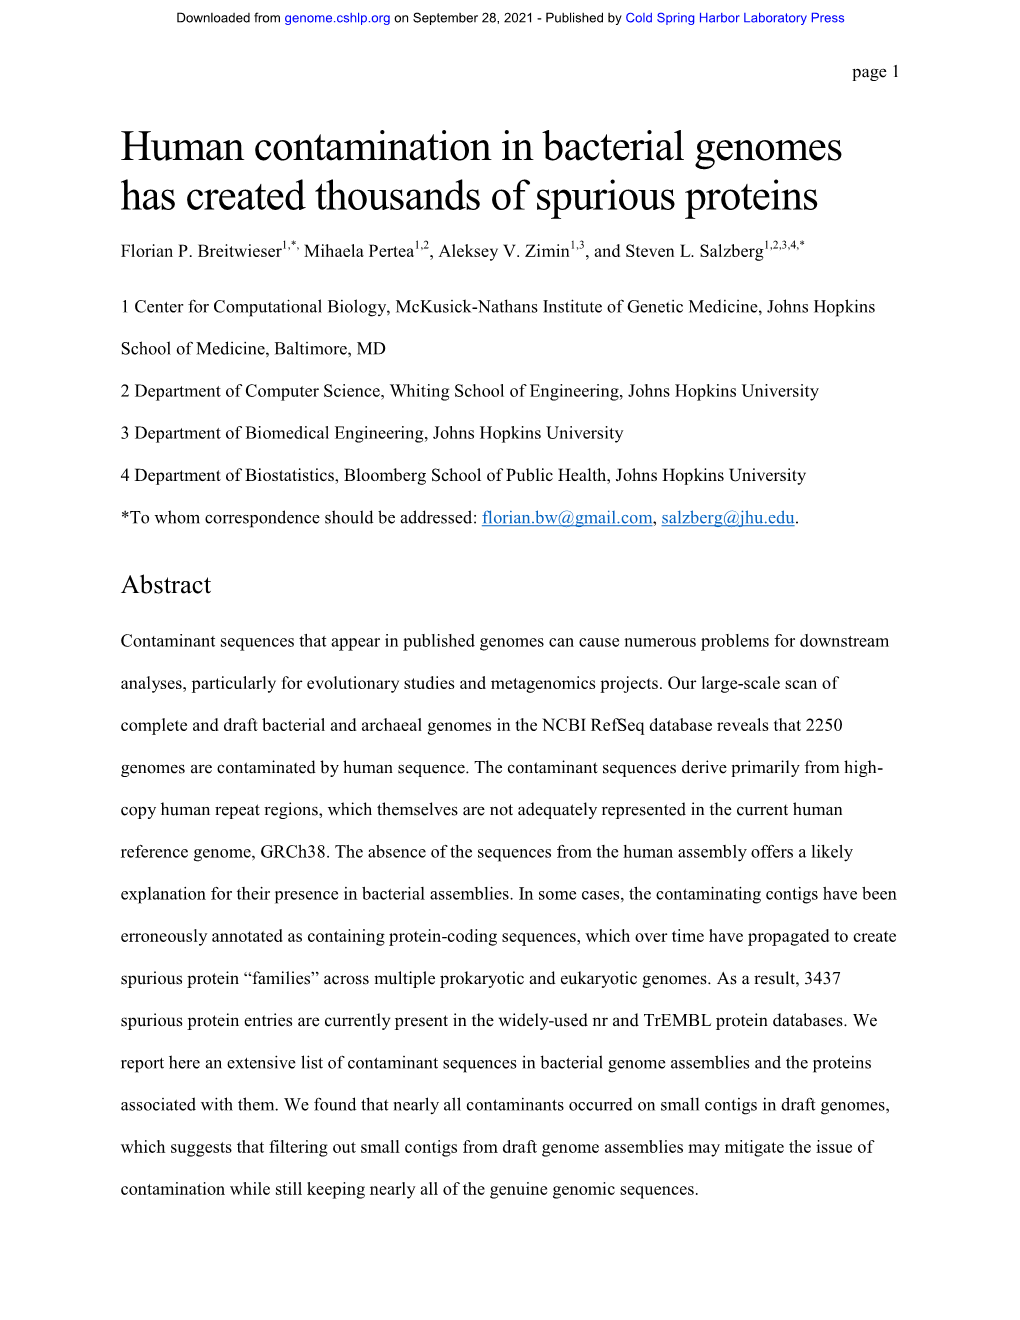 Human Contamination in Bacterial Genomes Has Created Thousands of Spurious Proteins